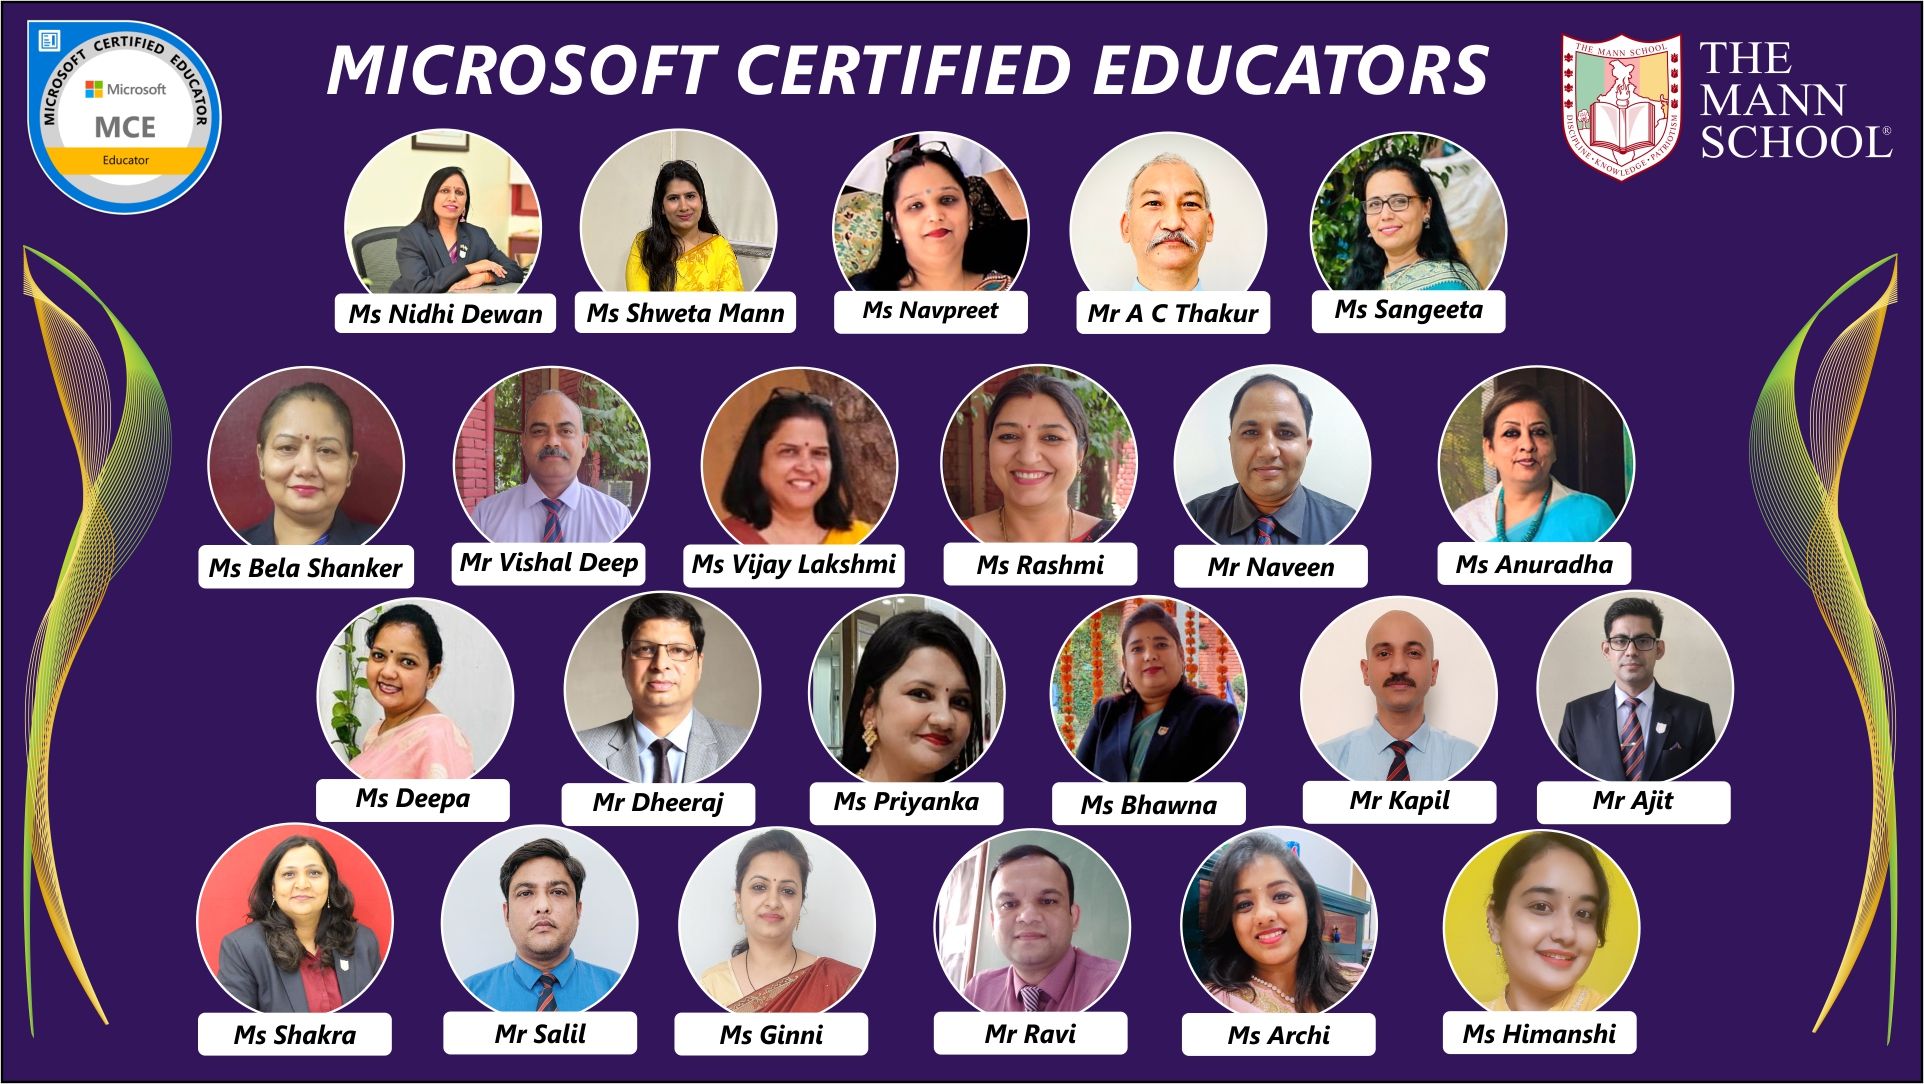 Congratulations to the 23 teachers of The Mann School Delhi for clearing the Microsoft Certified Educator certification and earning the badge